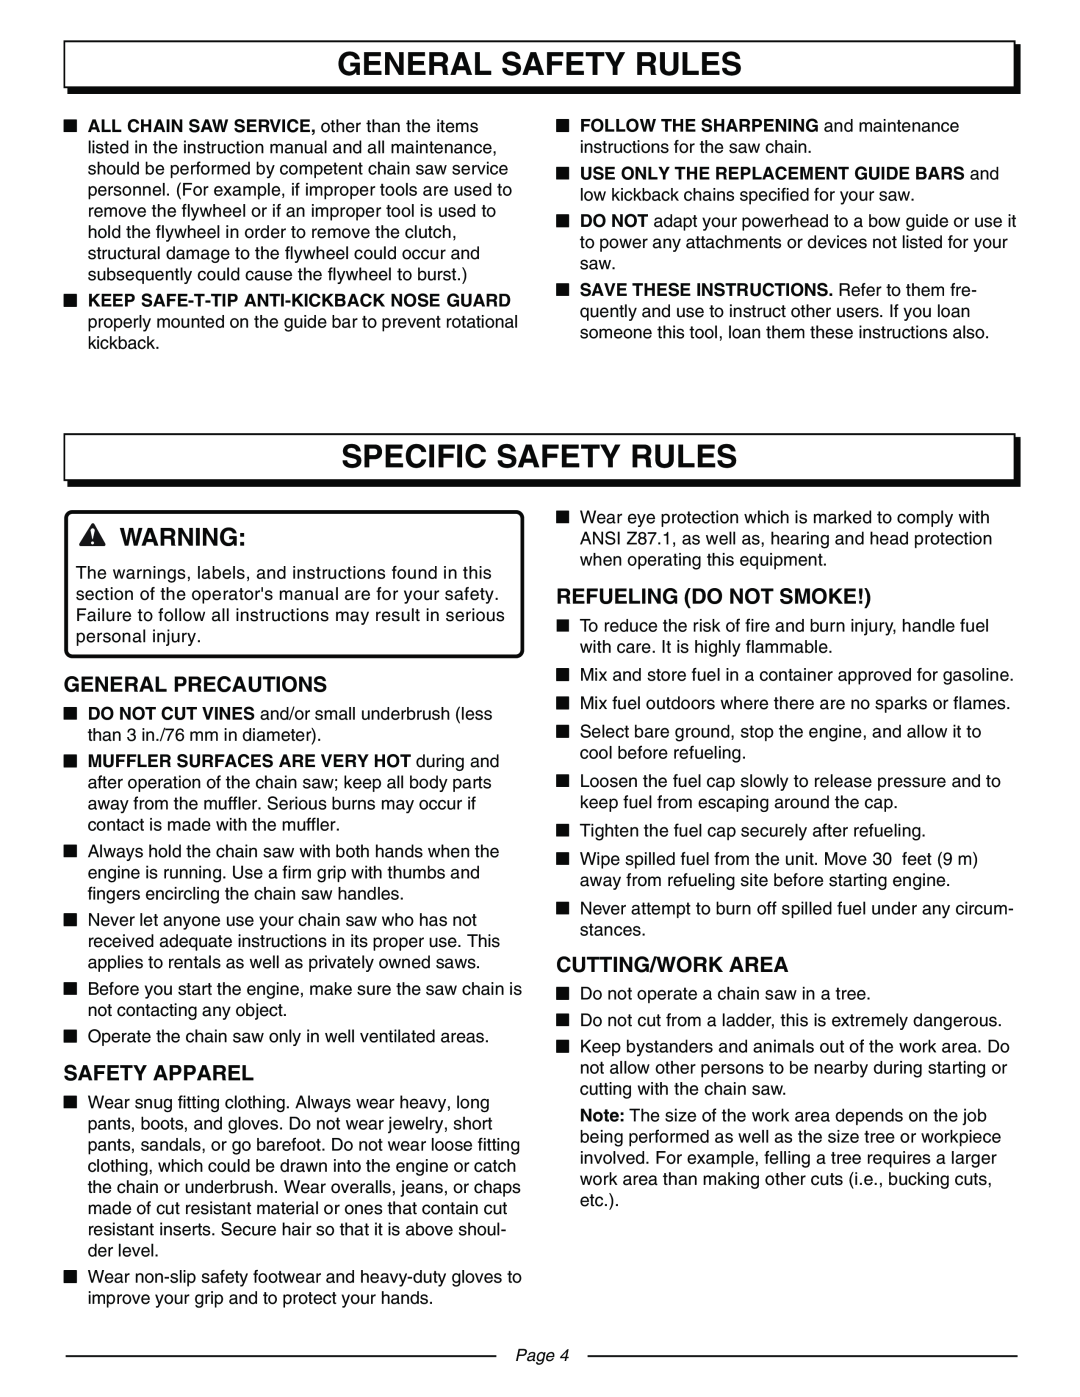 Homelite UT10570 Specific Safety Rules, General Precautions, Safety Apparel, Refueling Do Not Smoke, Cutting/Work Area 